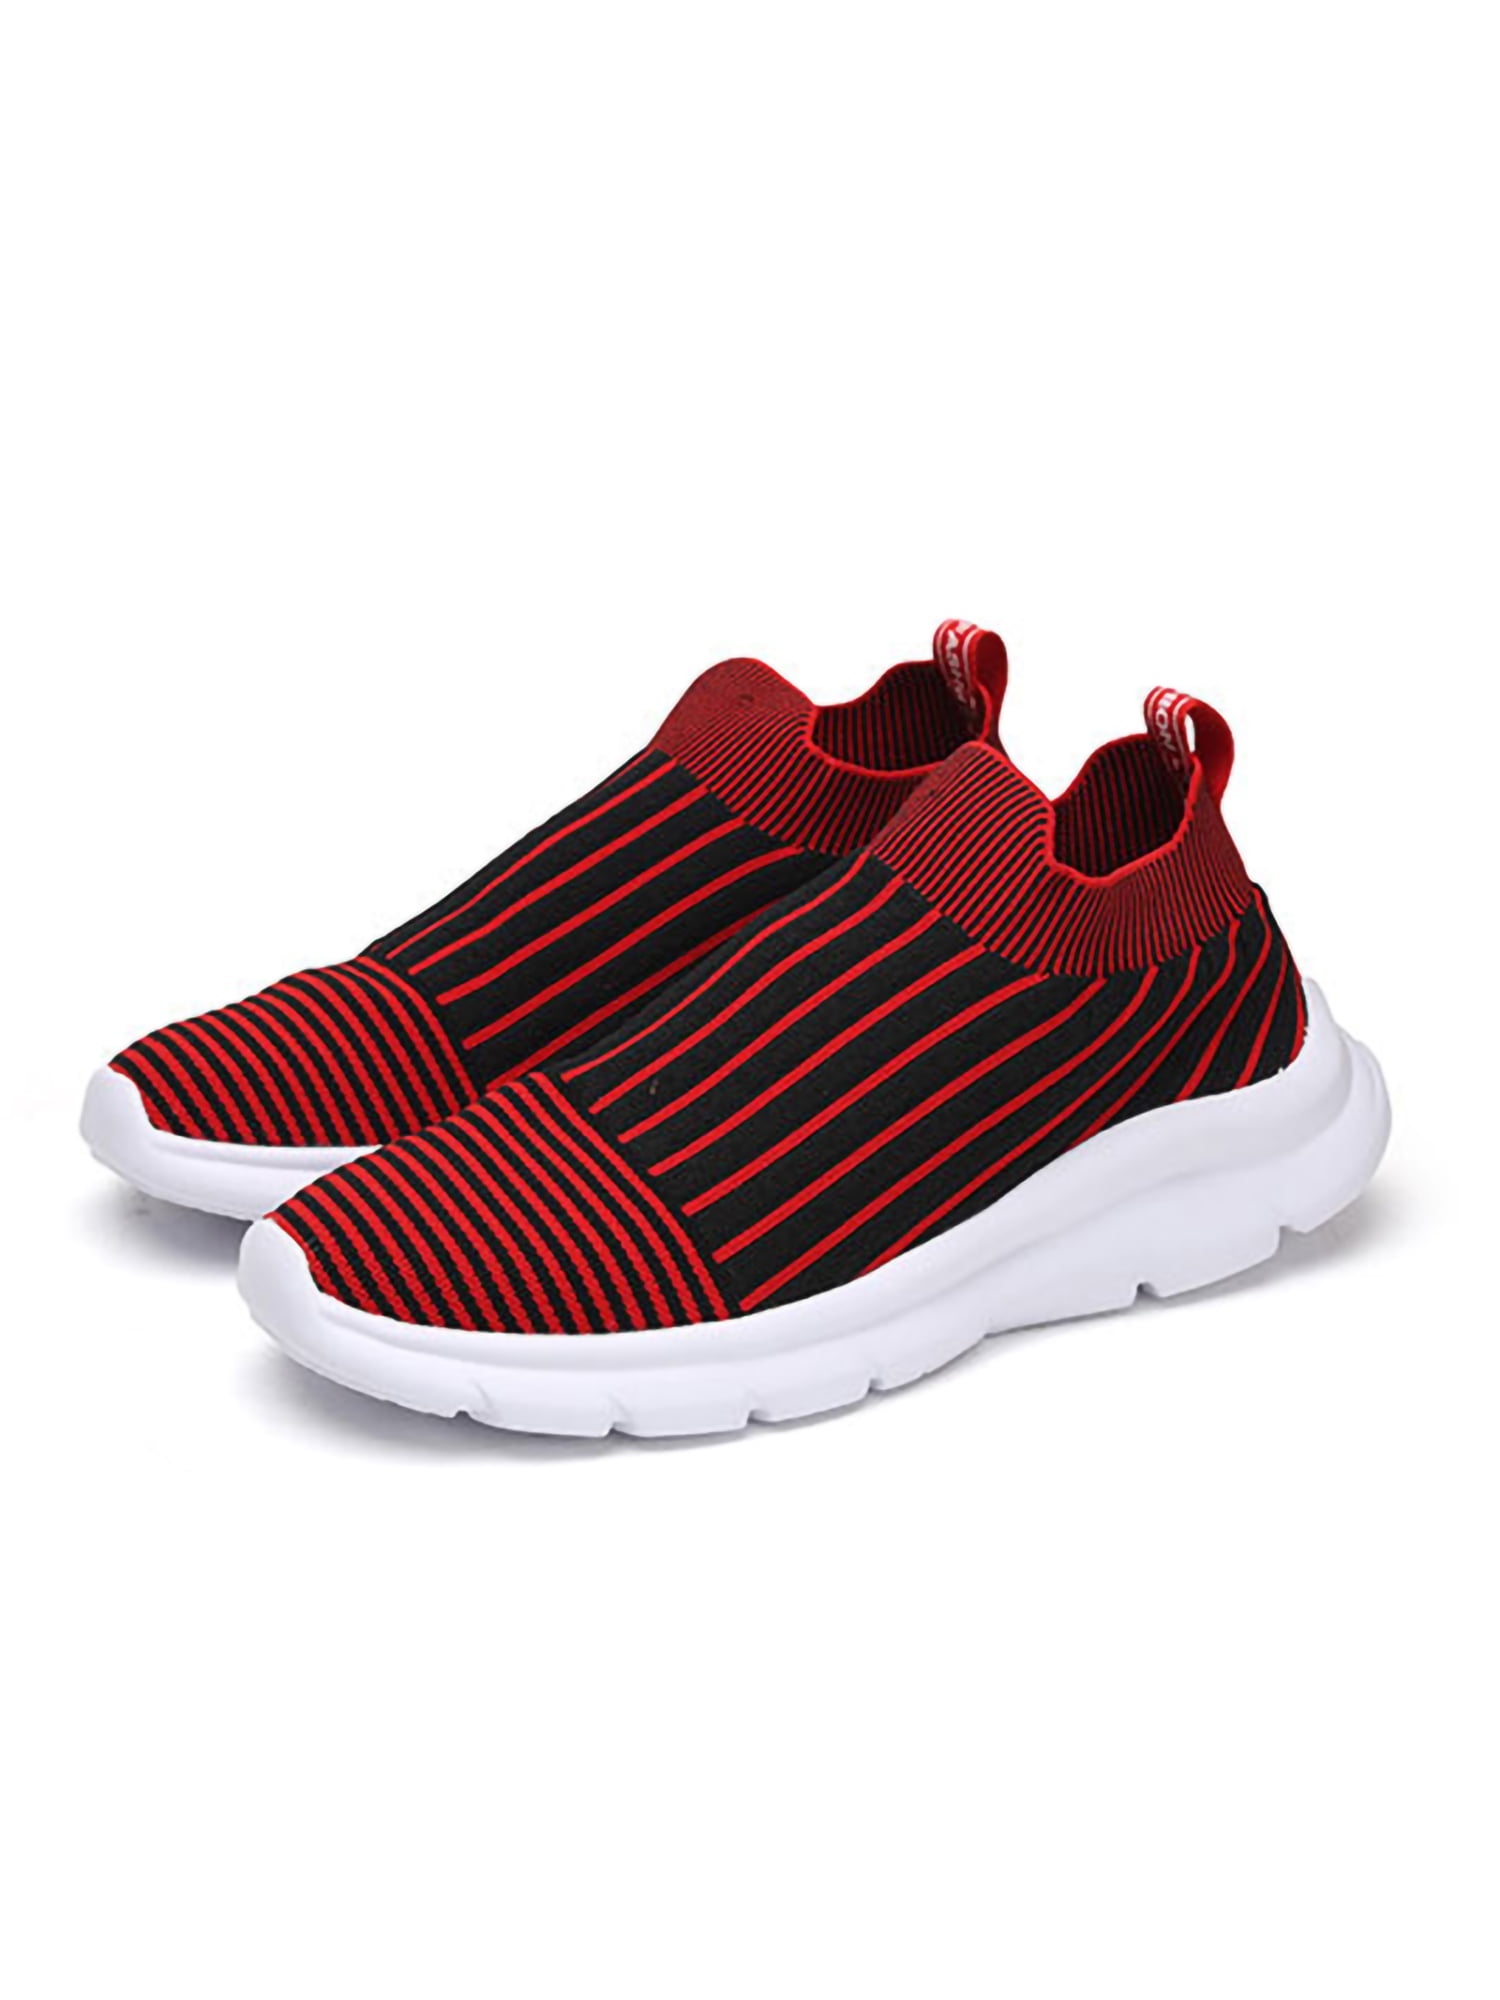 Details about   Sports Shoes Unisex Adults Trainers Lace Up Sneakers Fitness Casual Gym Comfort 